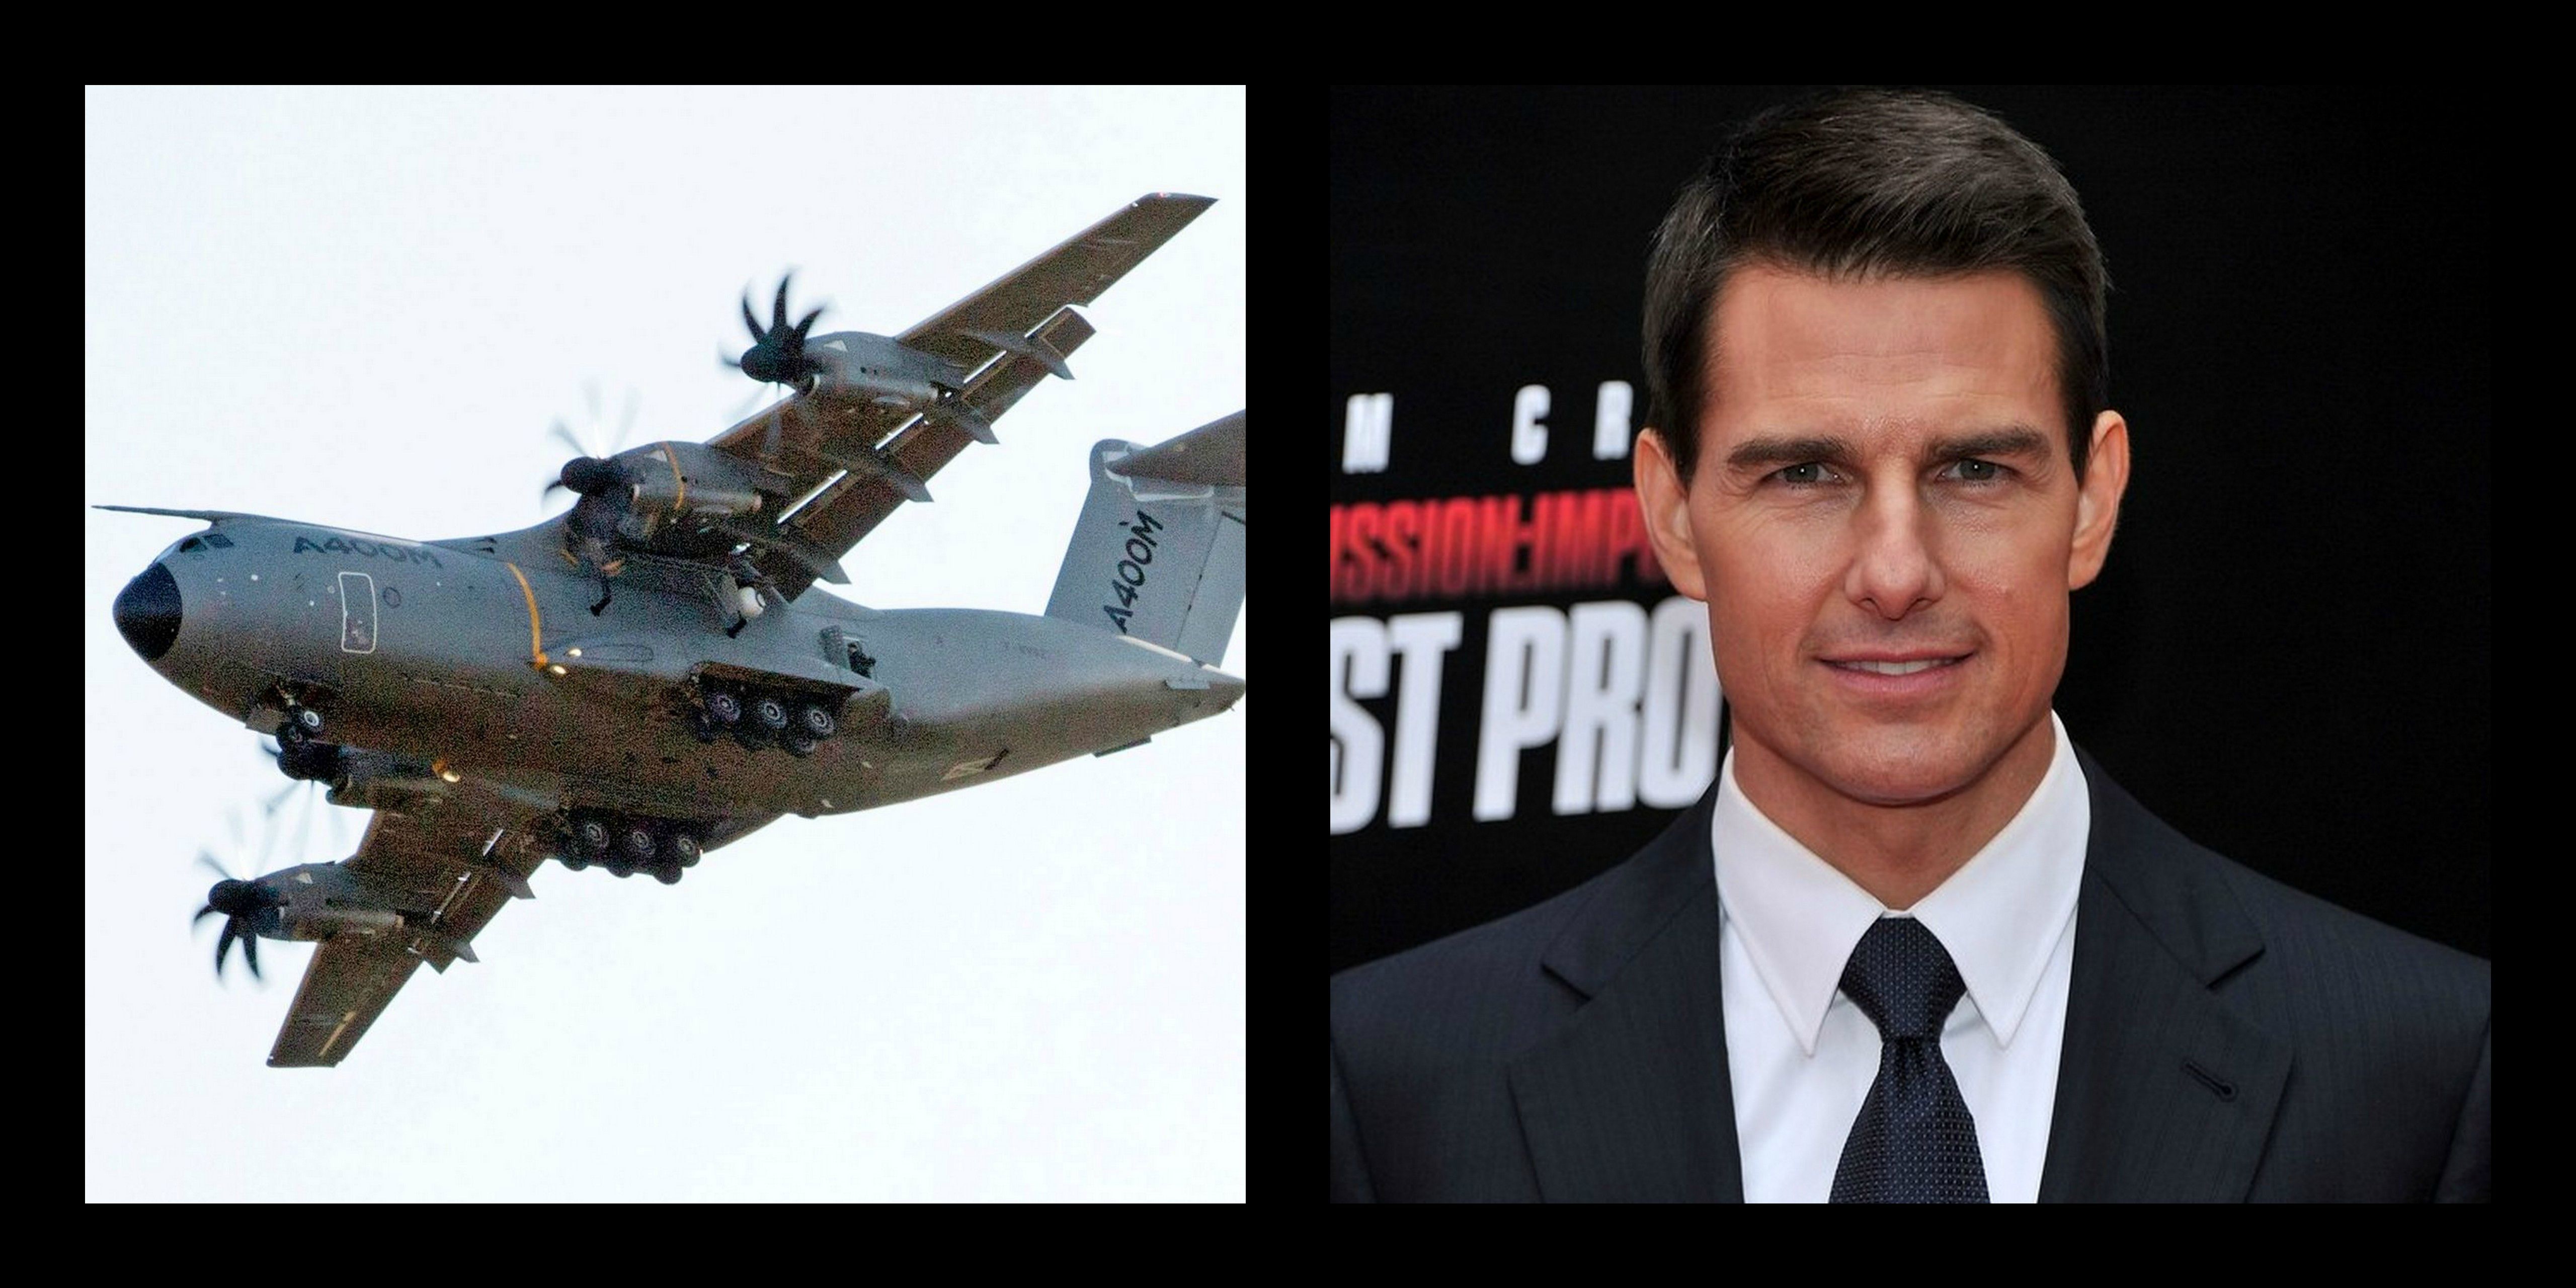 Mission Impossible 5 - Following the success of "Ghost Protocol", the fifth film in the series will see Tom Cruise reprise his role as Ethan Hunt. Not much else is known about this movie except that Tom Cruise himself was seen filming a shot while hanging outside of a military plane in the air. Release date: December 25th